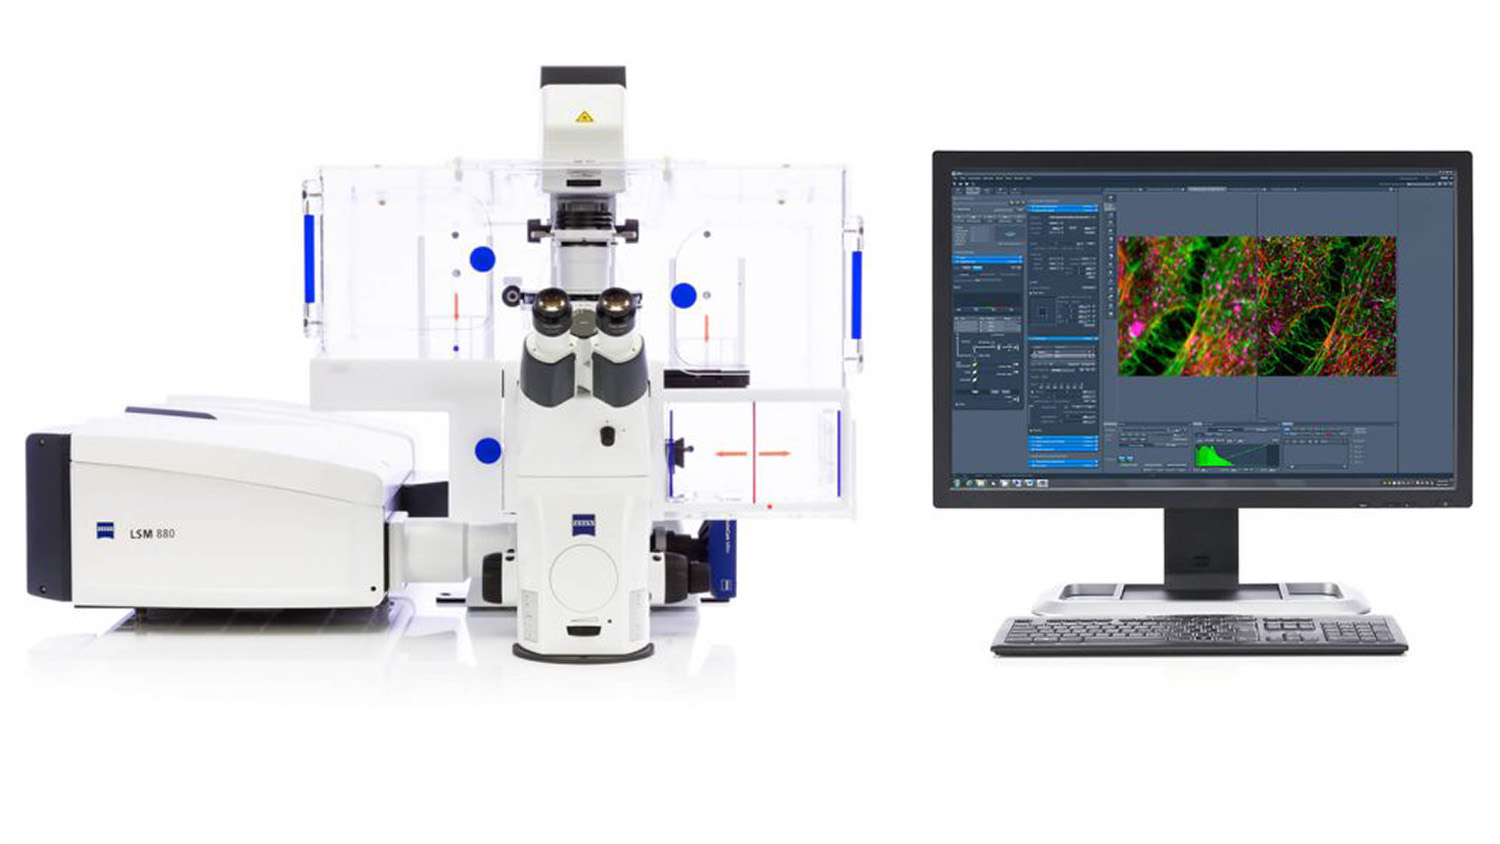 Zeiss microscope and monitor